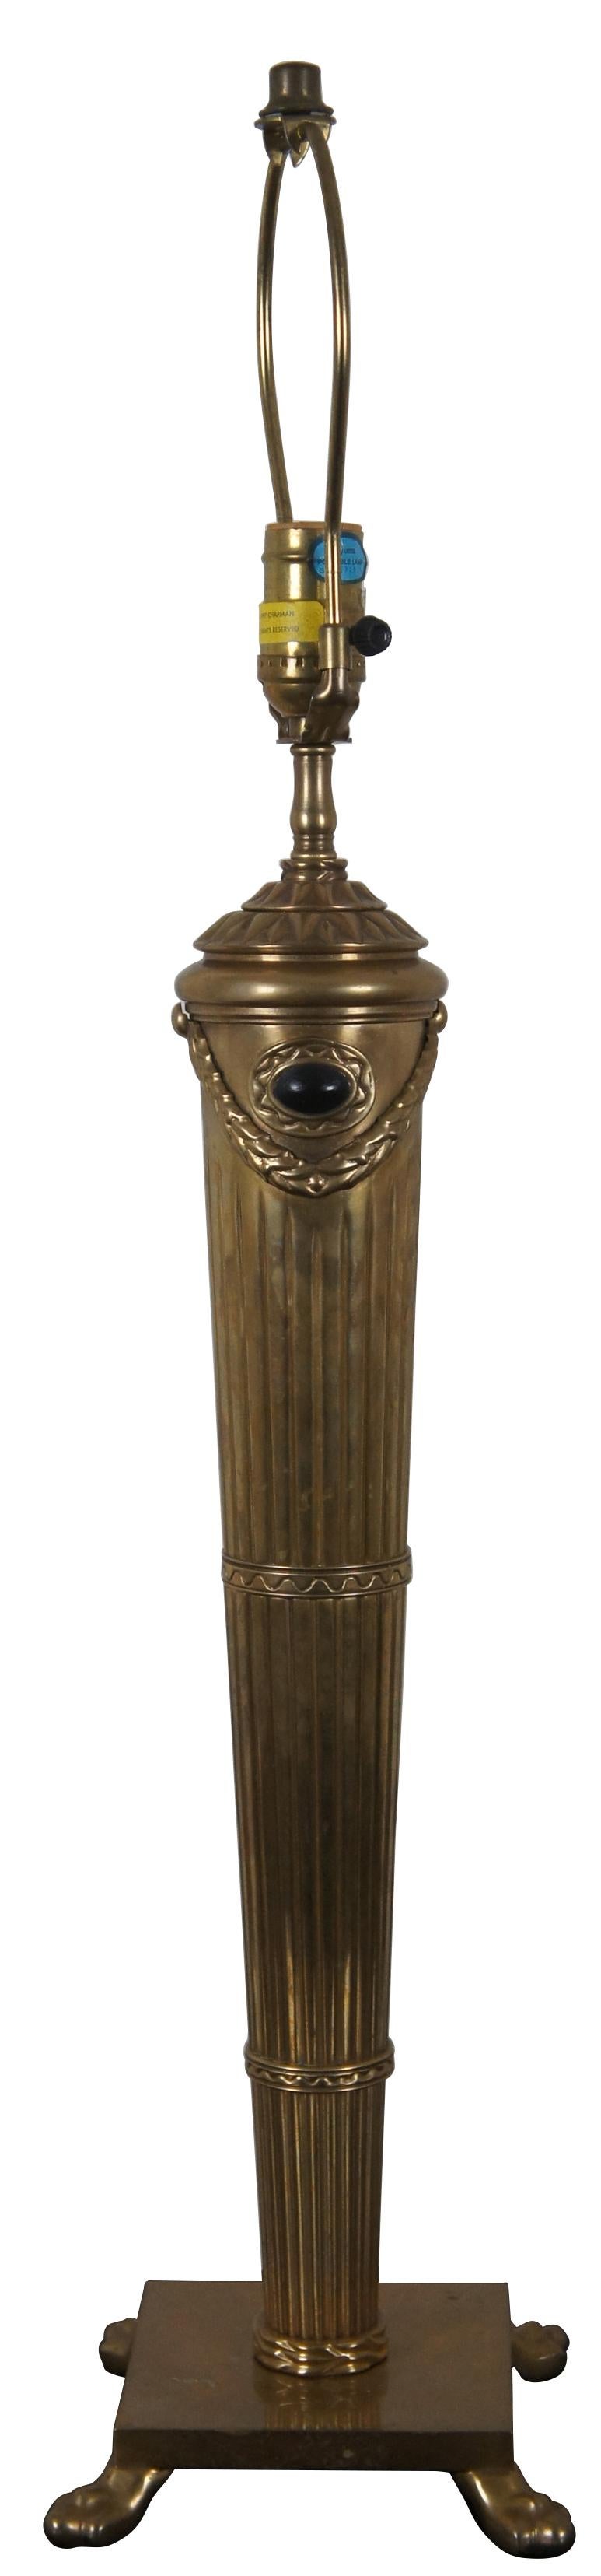 Vintage 1997 Chapman Brass table lamp in the shape of a neoclassical torch with black accents on a square base with paw feet. A stunning lamp drawing inspiration from Empire and Regency styling.
  